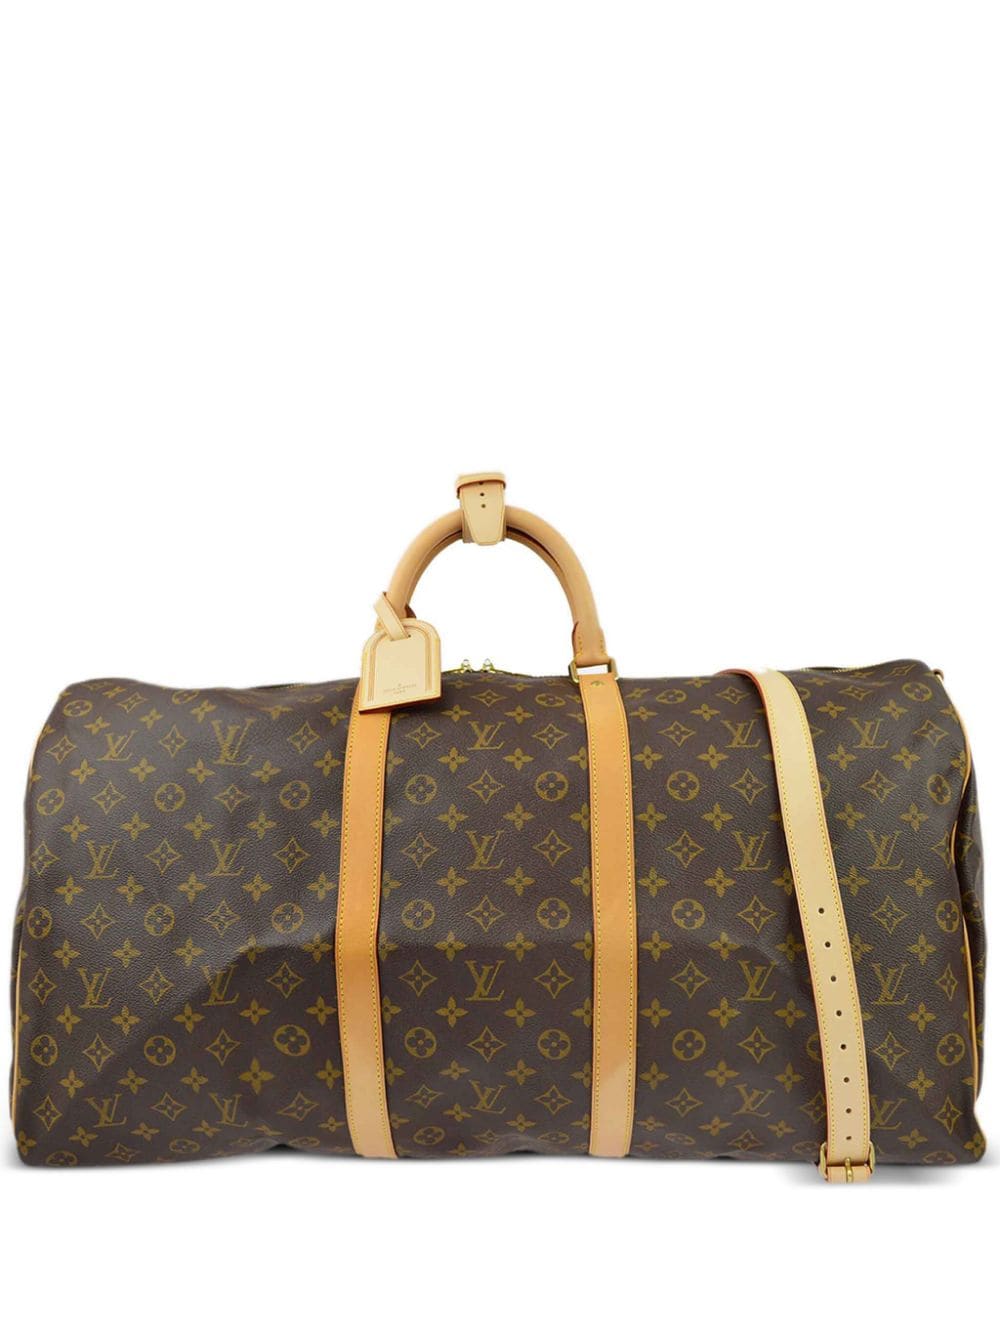 2009 Keepall Bandouliere 60 two-way travel bag